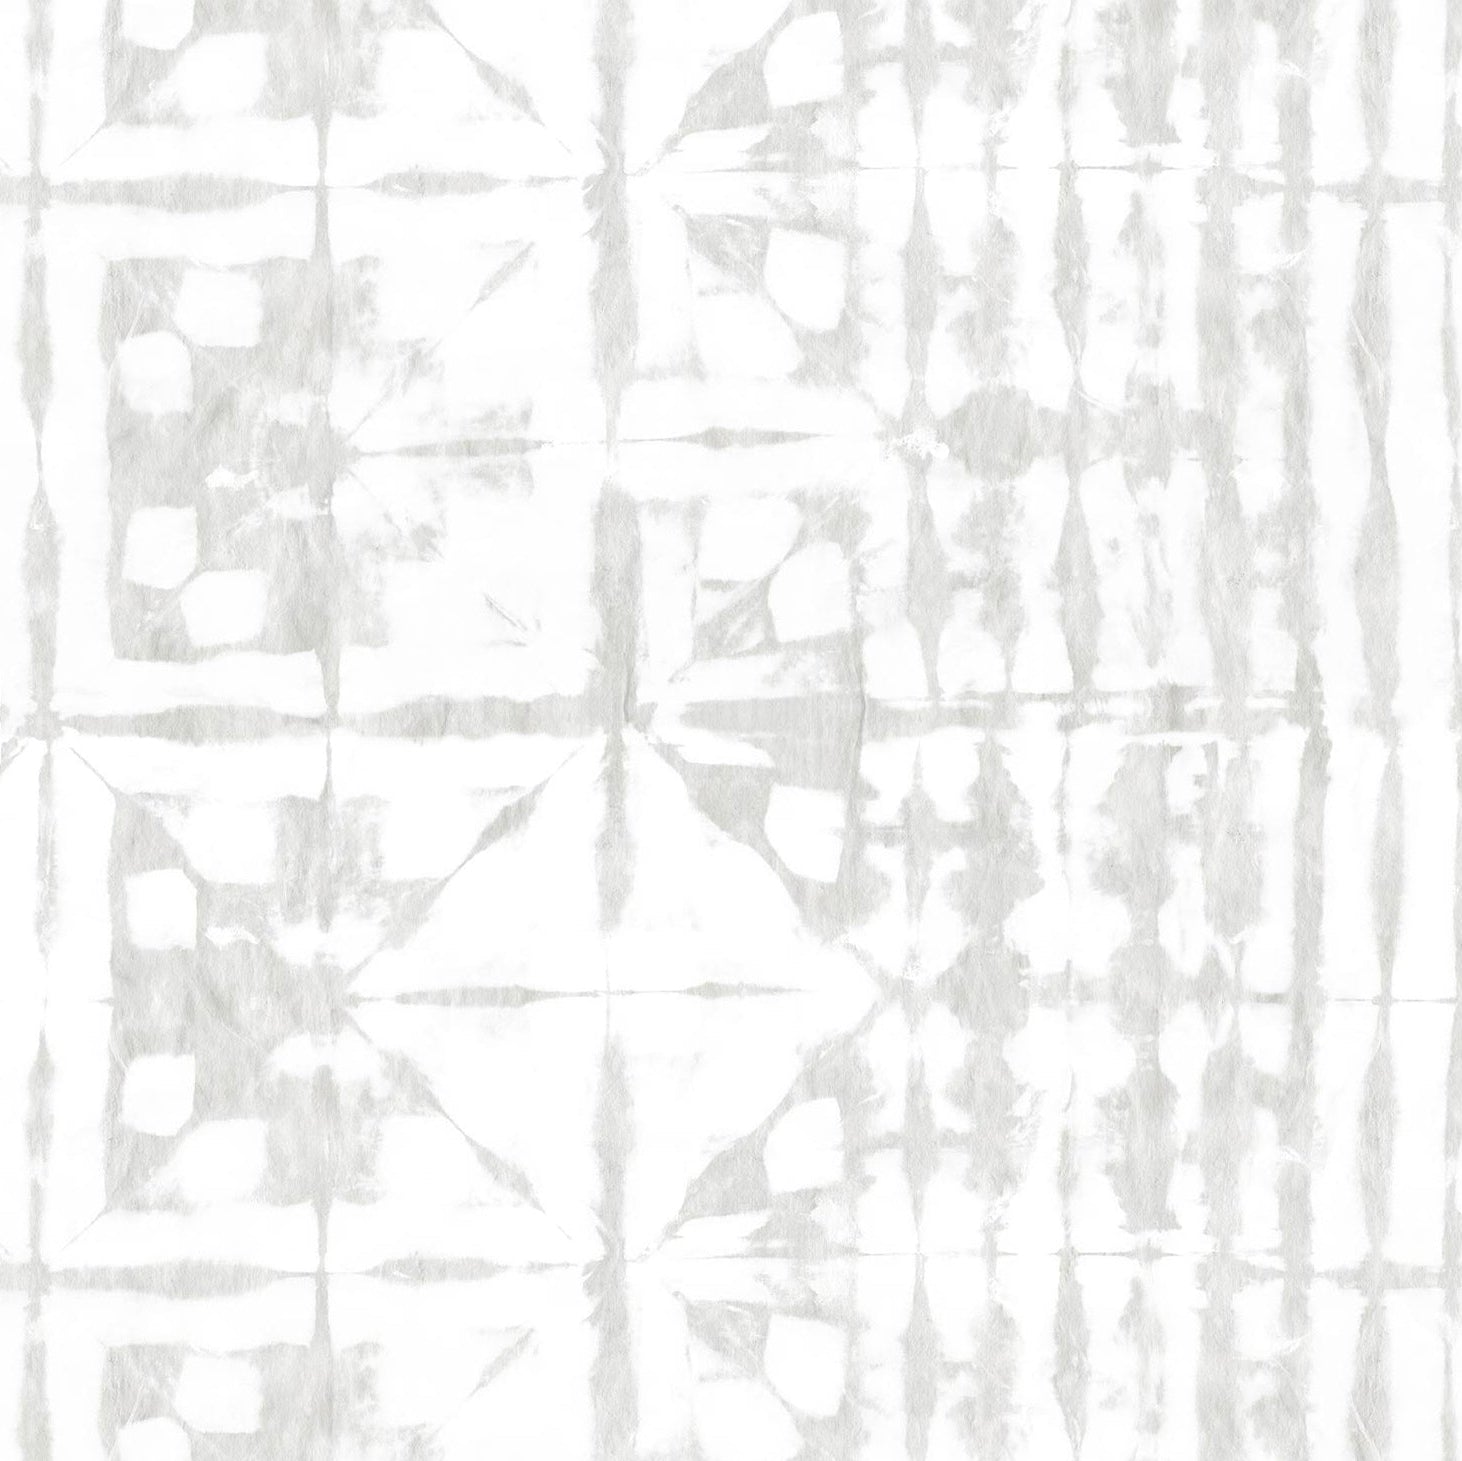 Detail of wallpaper in an abstract dyed grid print in mottled white and gray.